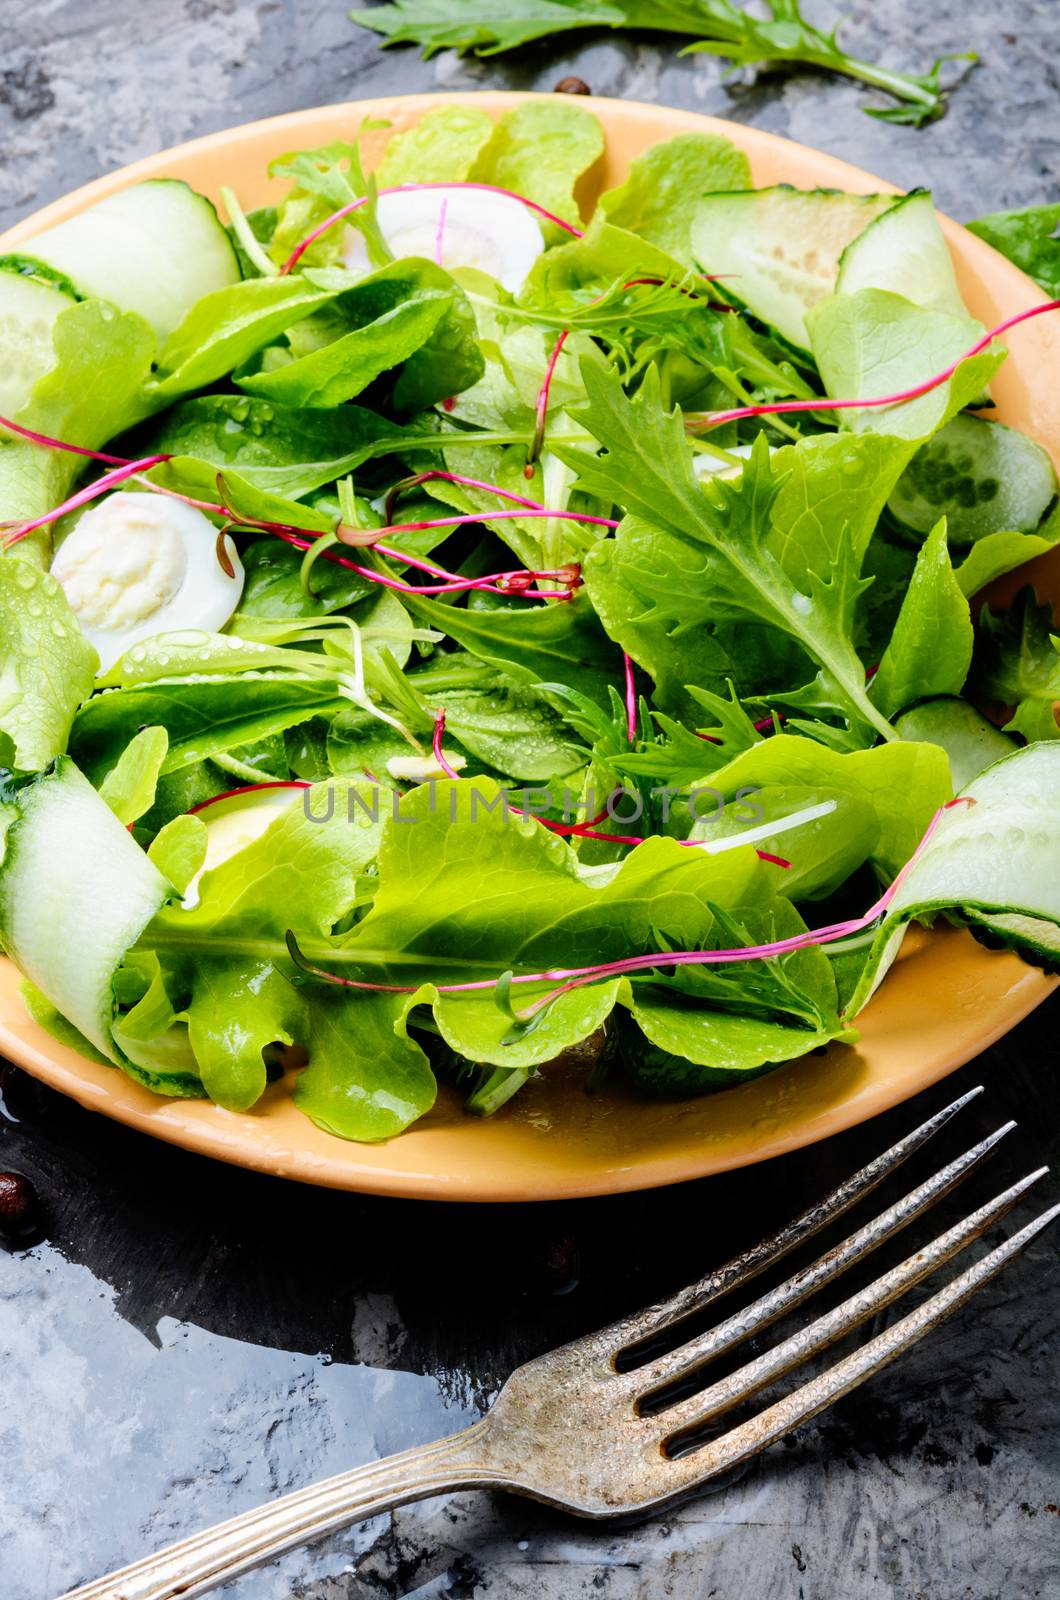 Vegetable salad with fresh lettuce.Fresh green mix salad with microgreens